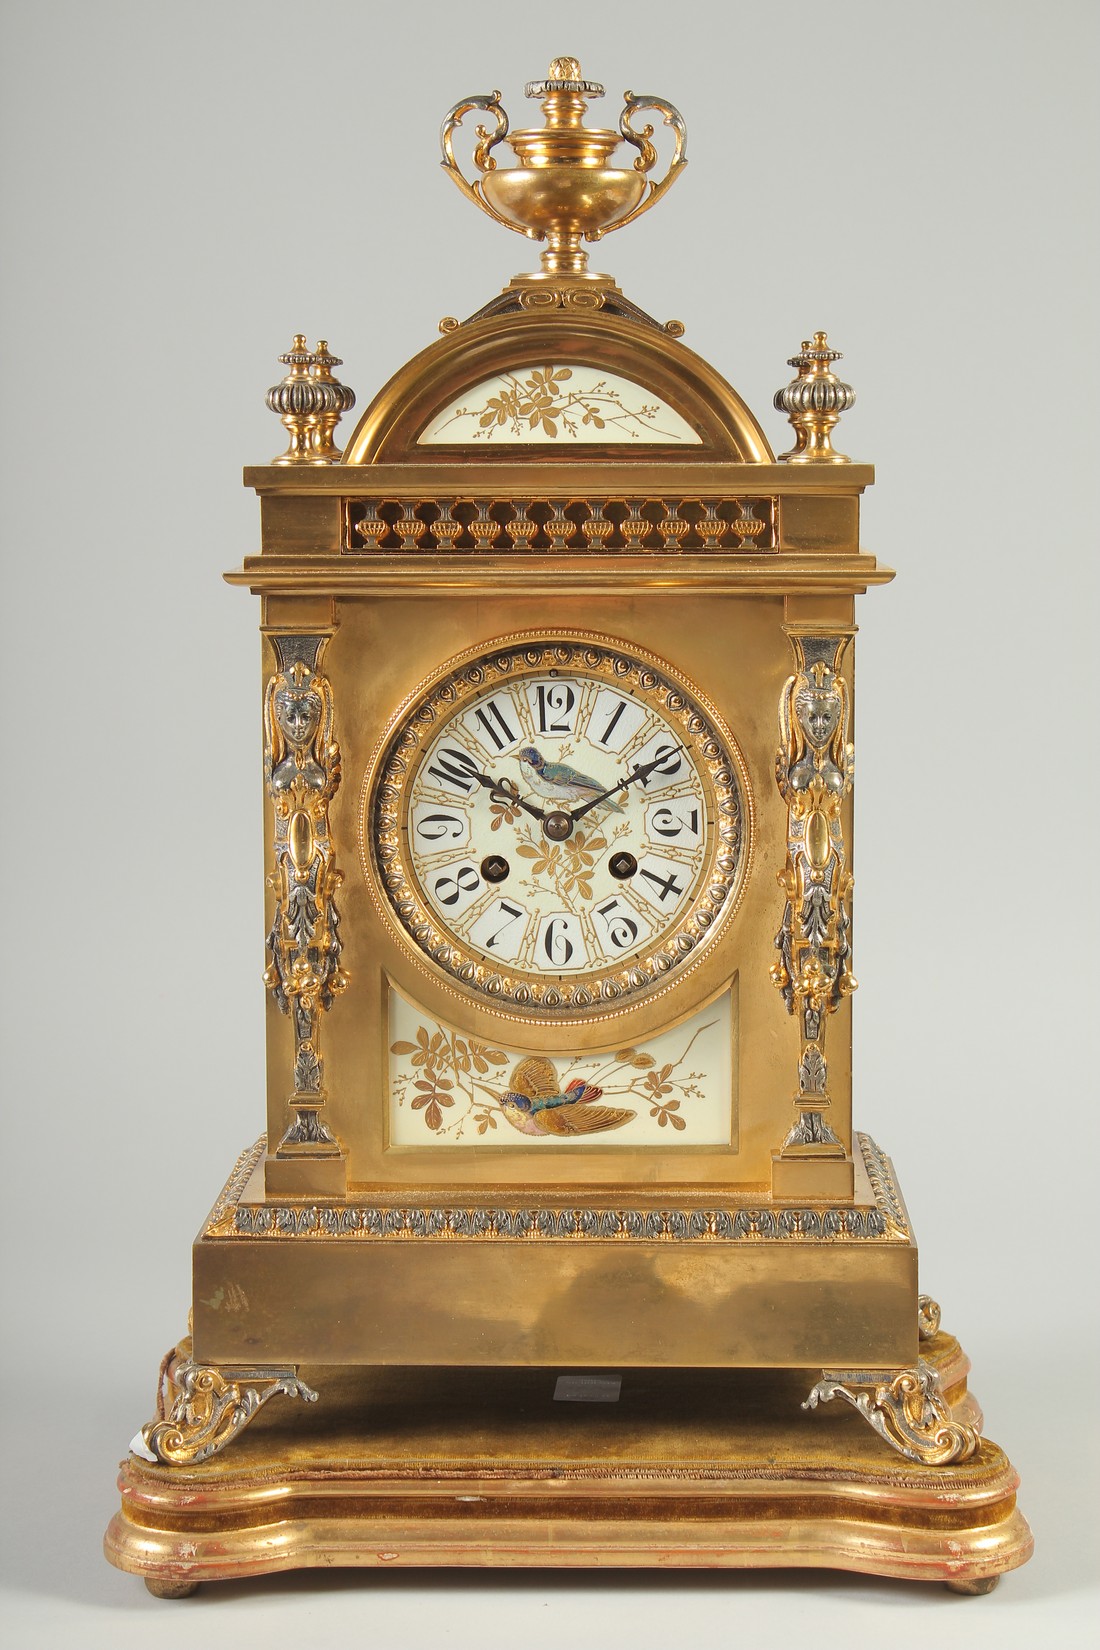 A GOOD 19TH CENTURY FRENCH ORMOLU MANTLE CLOCK possibly by ACHILLE BROCOT, with eight day movement